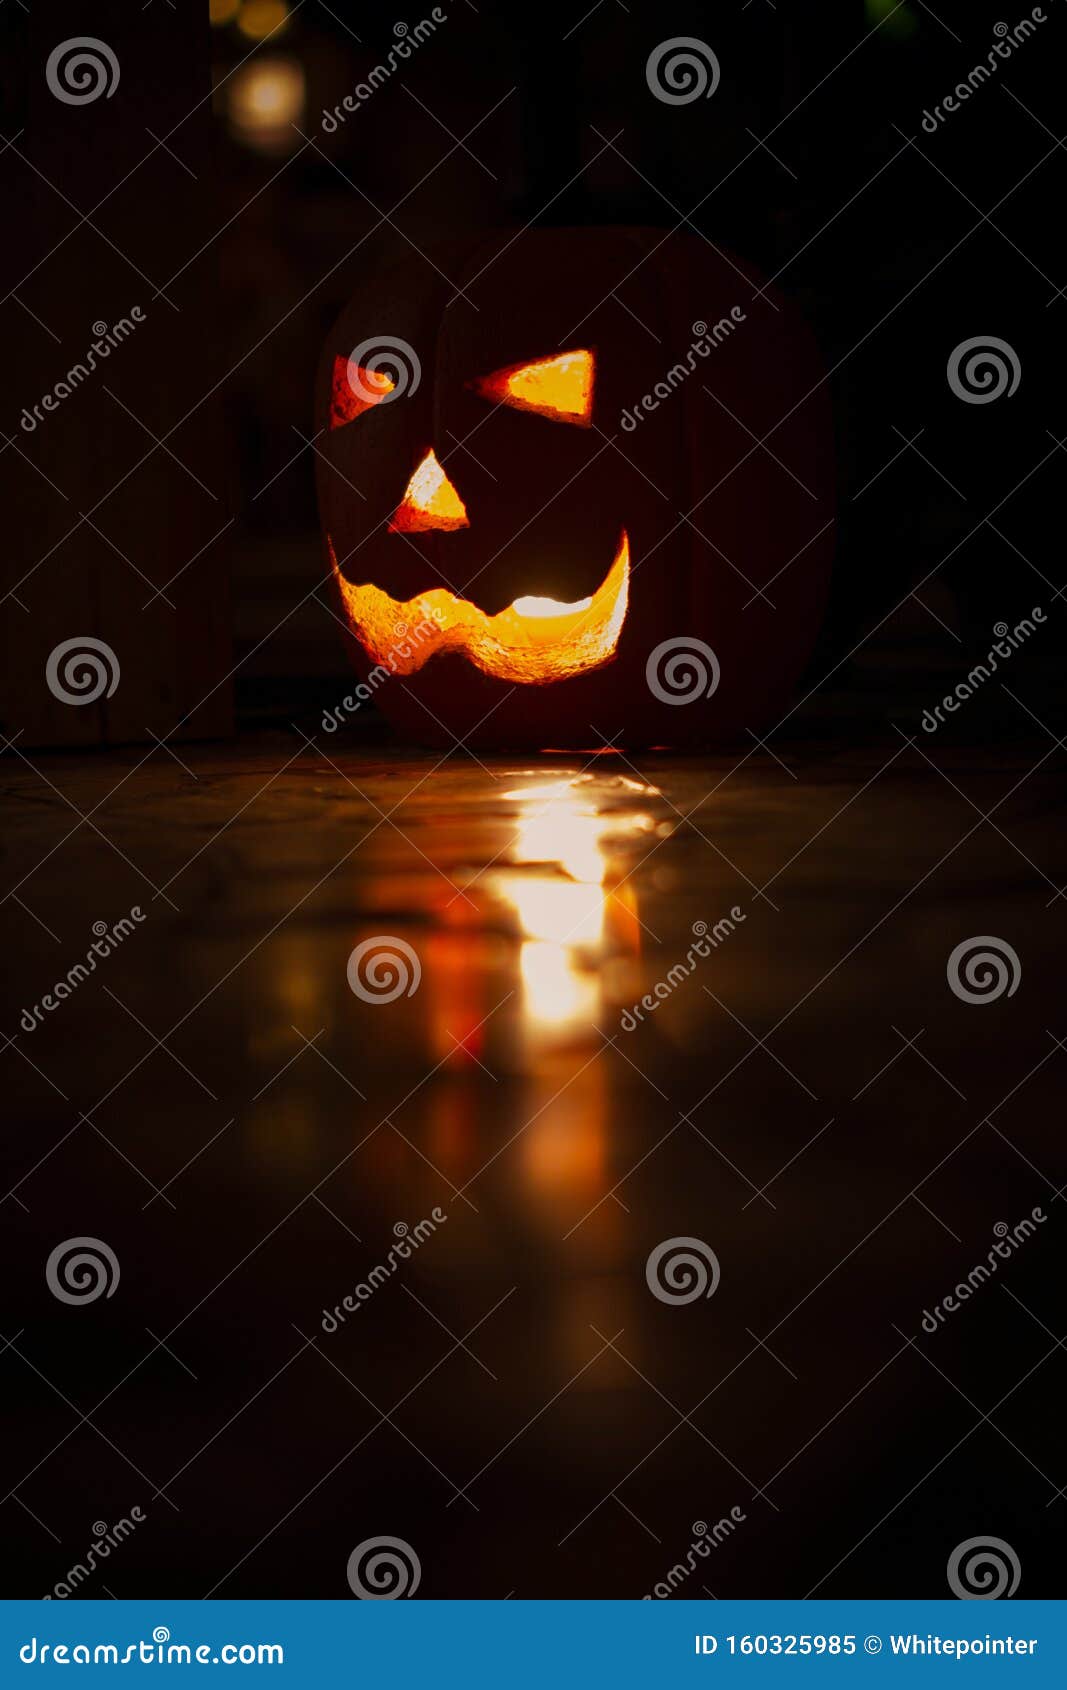 Halloween Pumpkin with a Scary Evil Face Stock Image - Image of carved ...